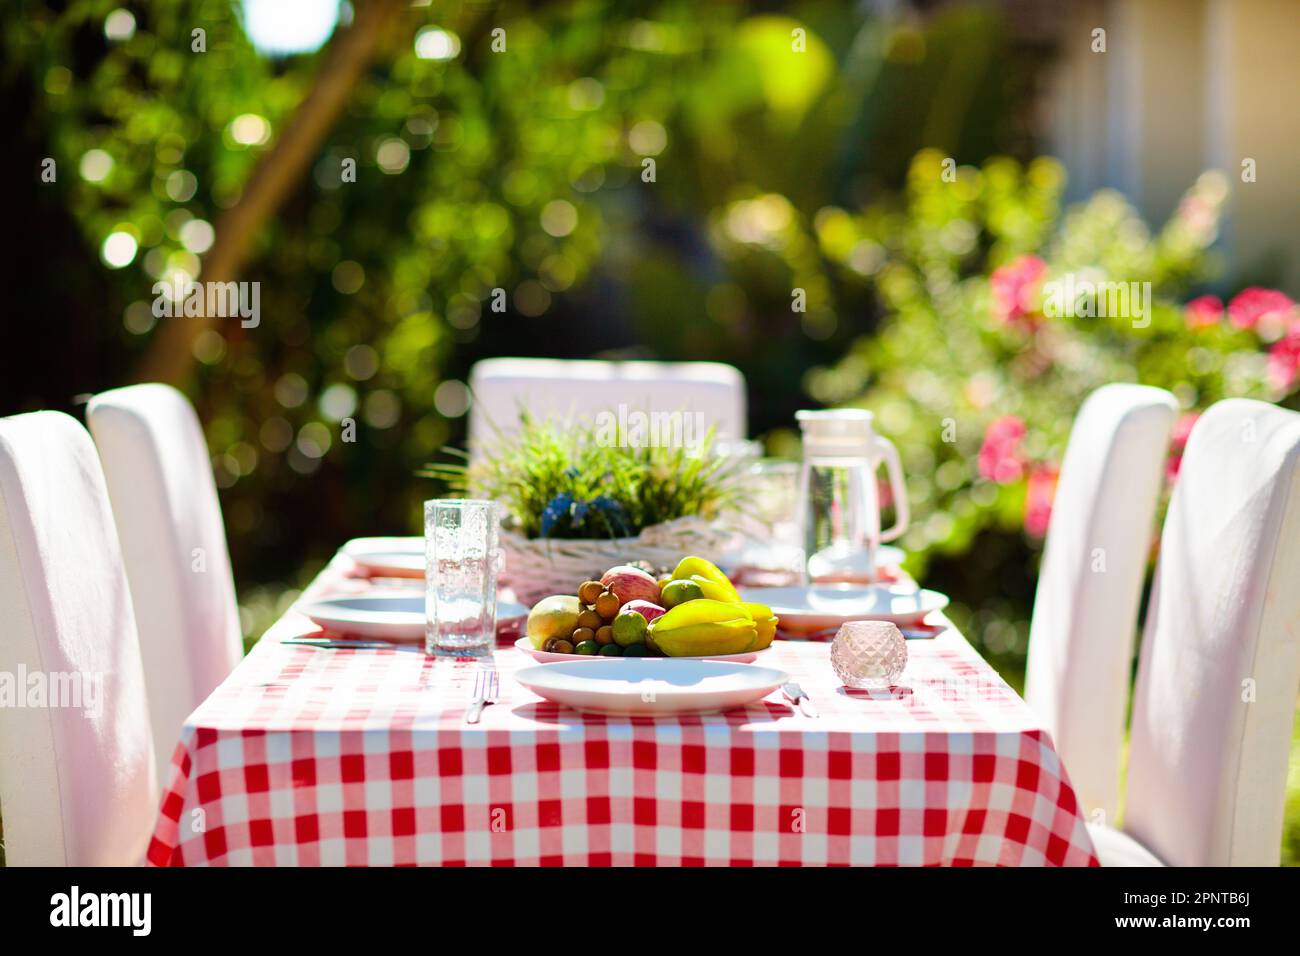 Summer lunch outdoors. Table setting for barbecue party. Garden fun. BBQ in sunny backyard. Party decoration. Fruit and meat for picnic. Stock Photo